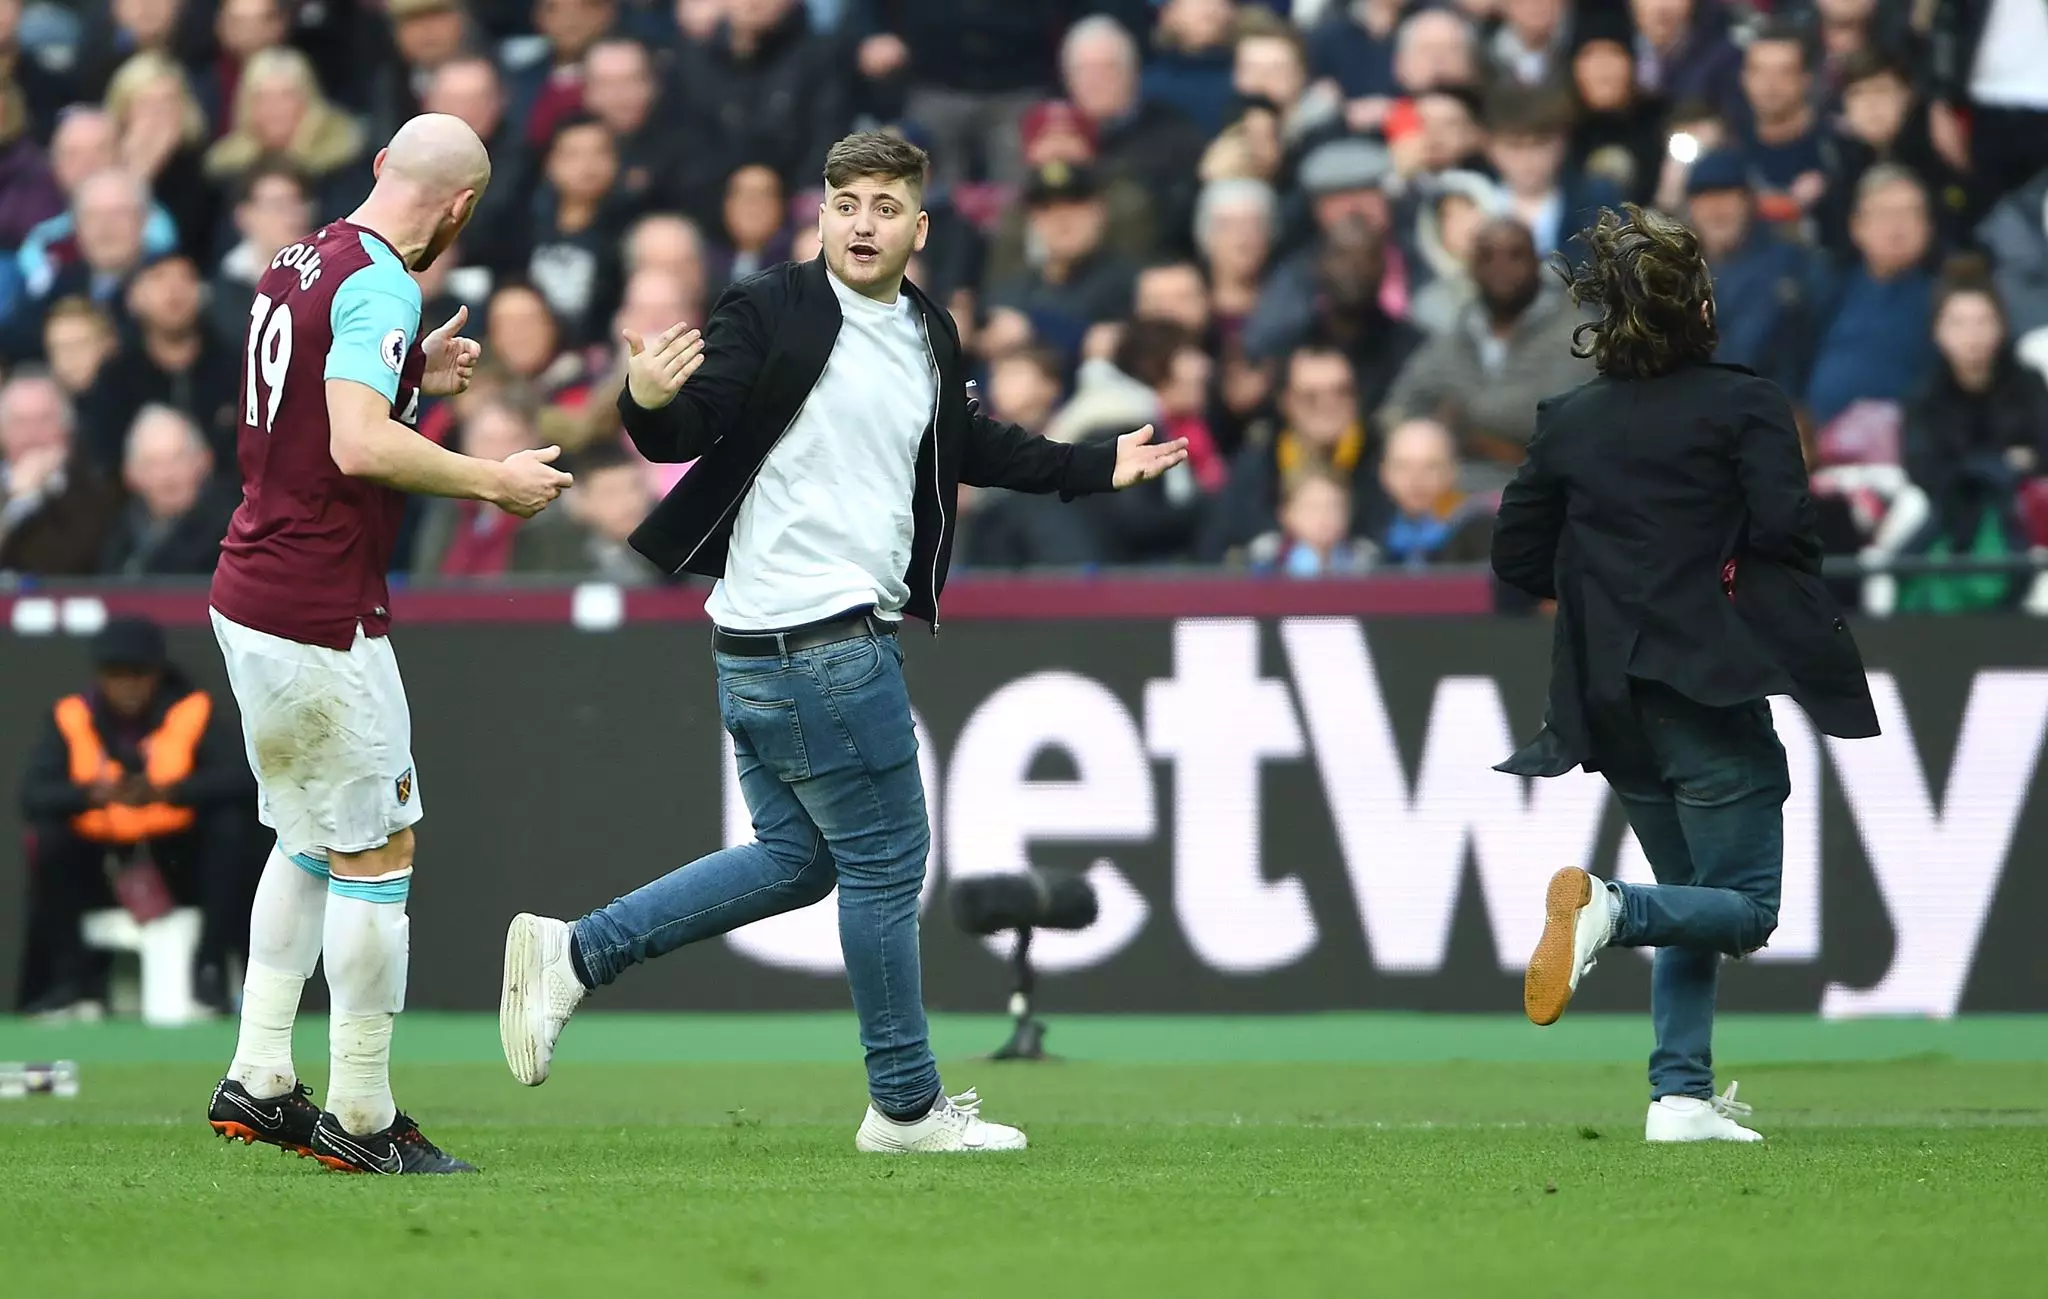 West Ham fans run onto the pitch. Image: PA